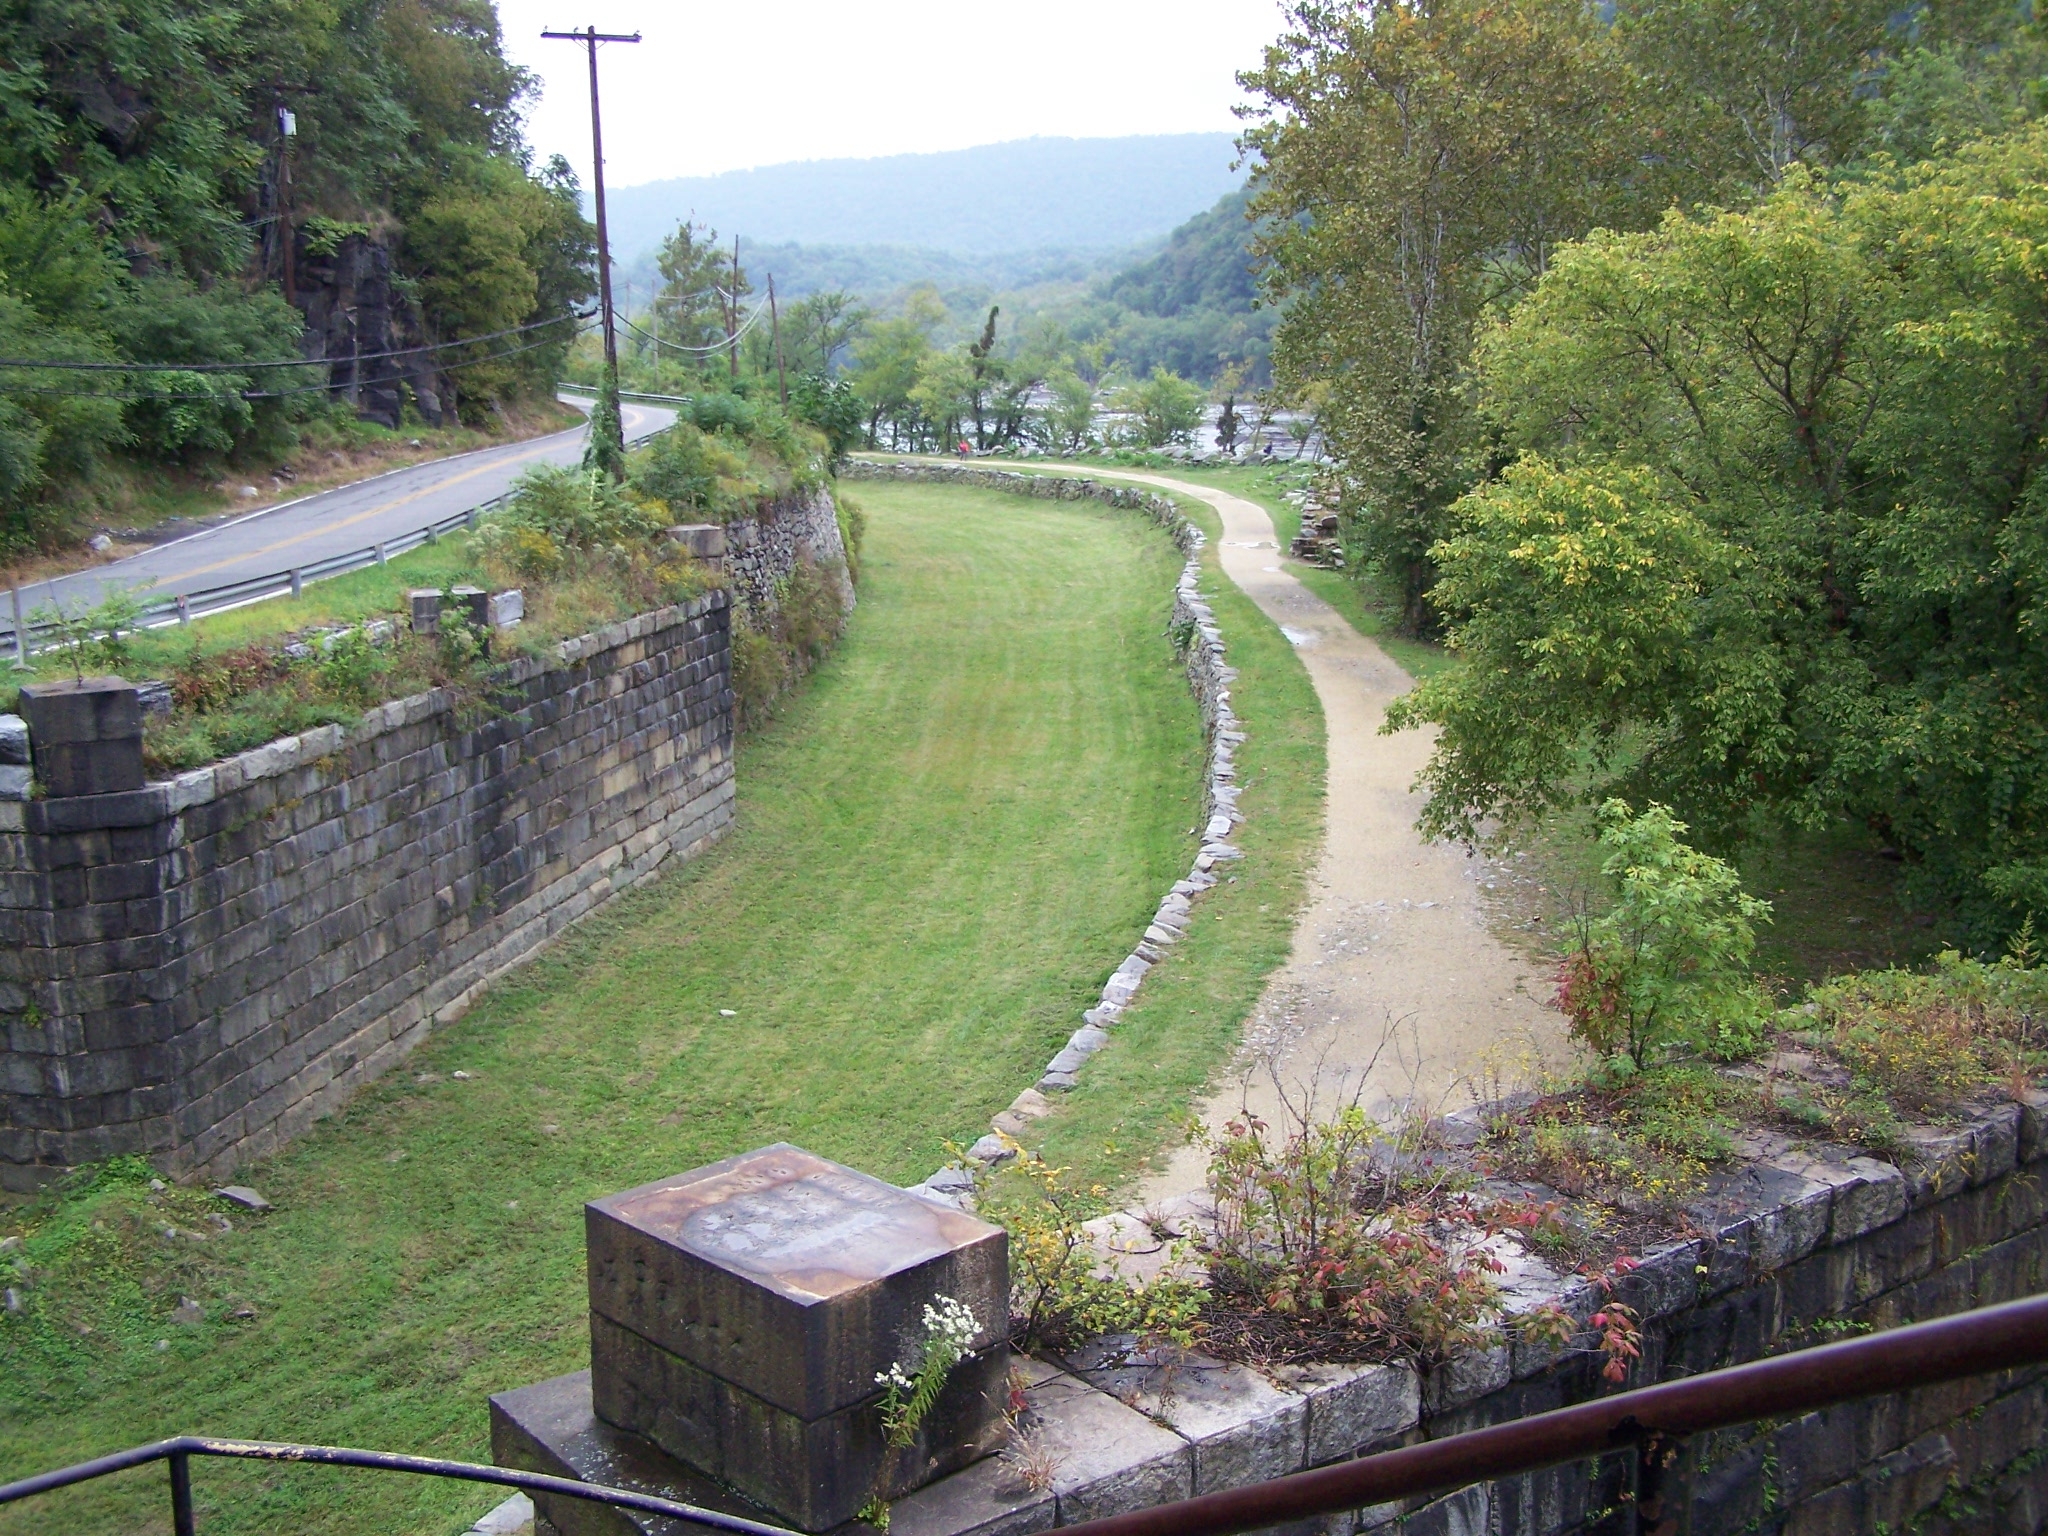 Remains of the Chesapeake and Ohio Canal